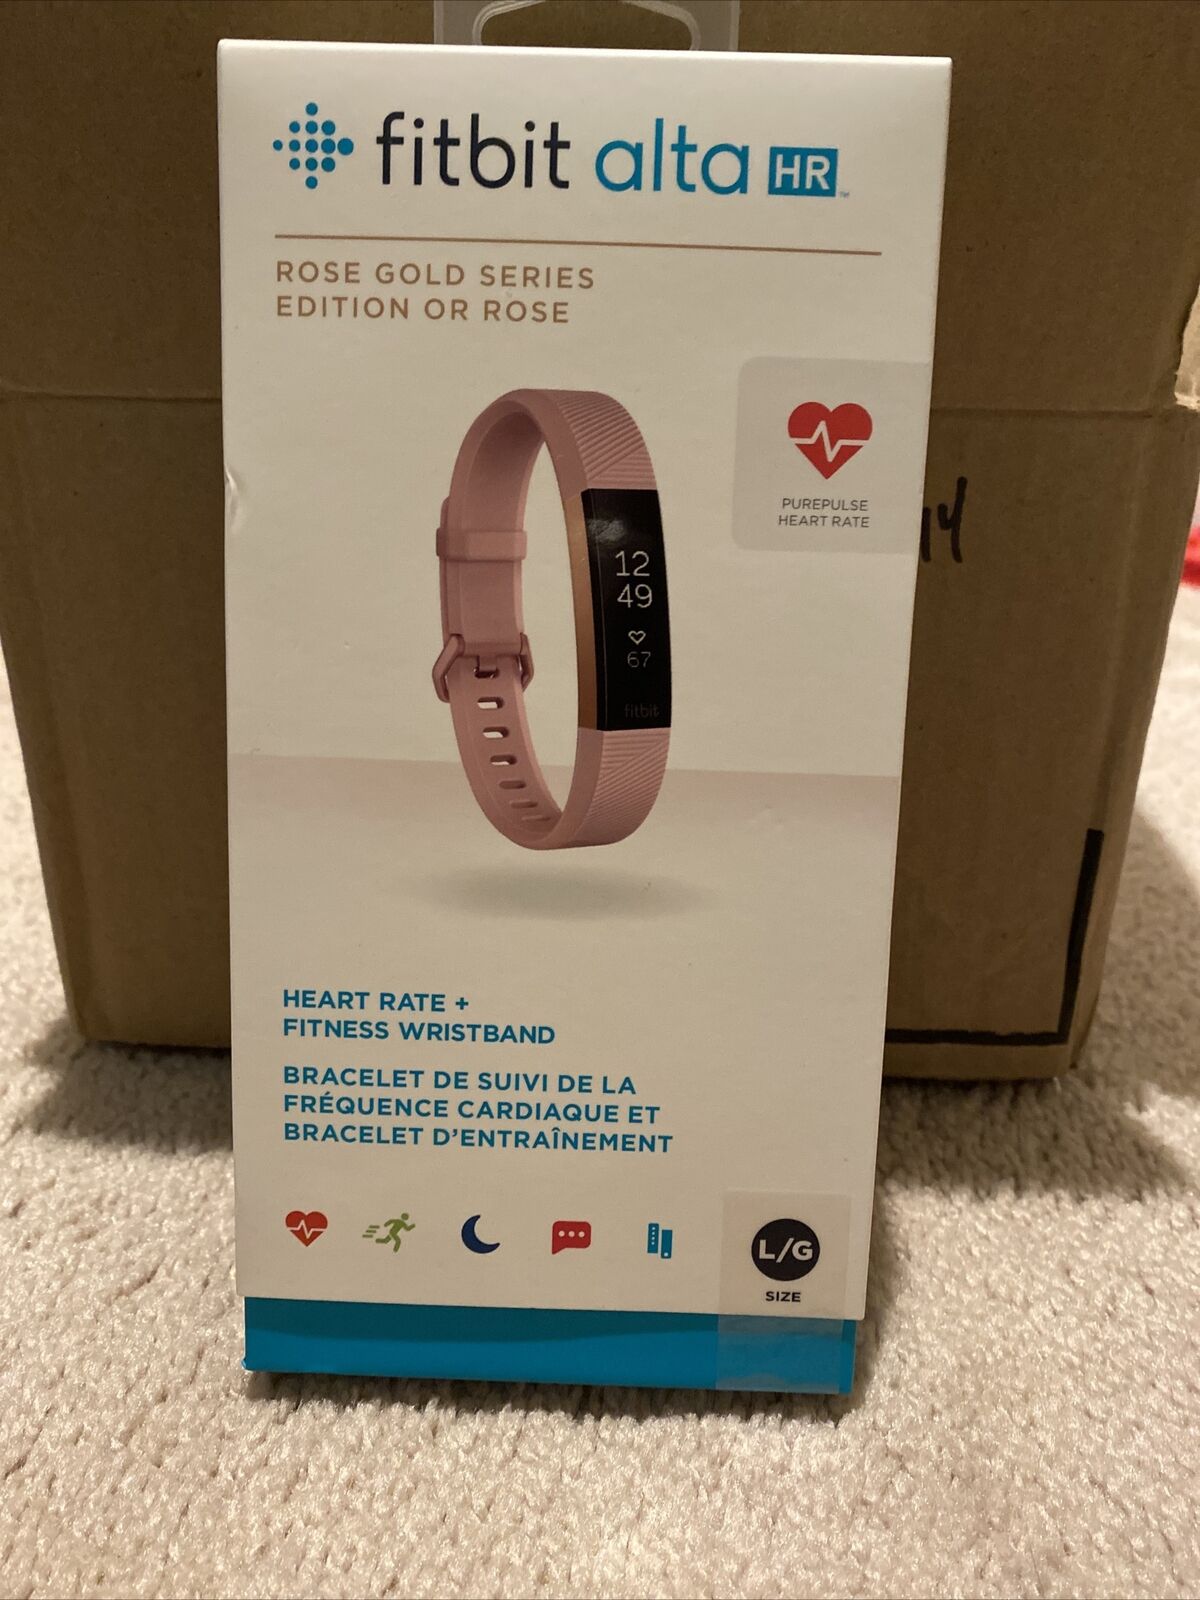 fitbit gold series